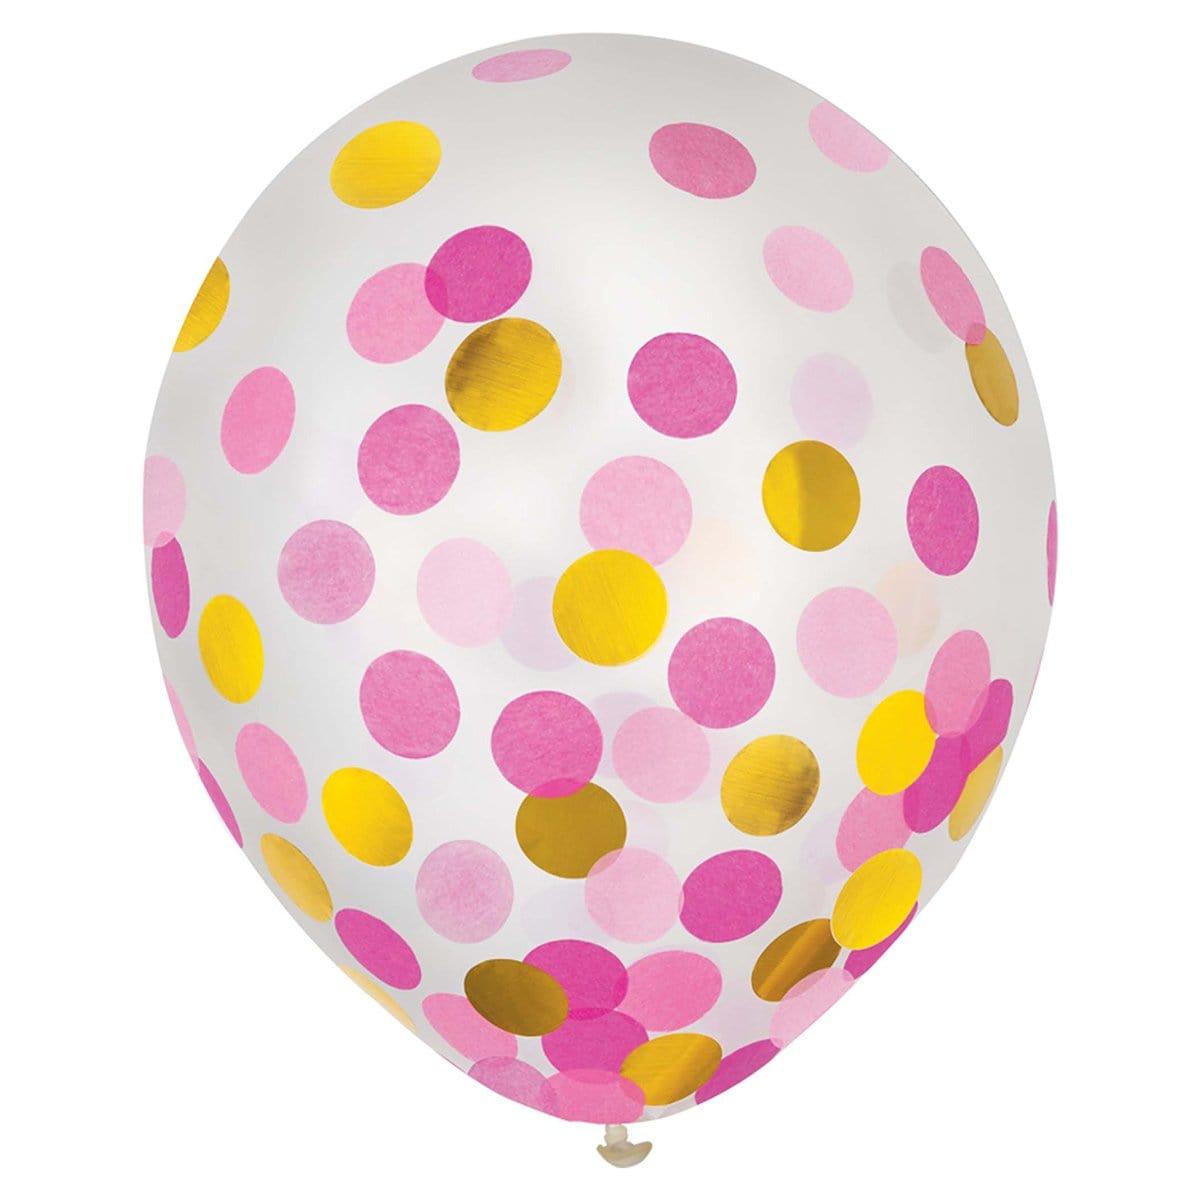 Buy Balloons Latex Balloons With Pink and Gold Confetti, 12 Inches, 6 Count sold at Party Expert